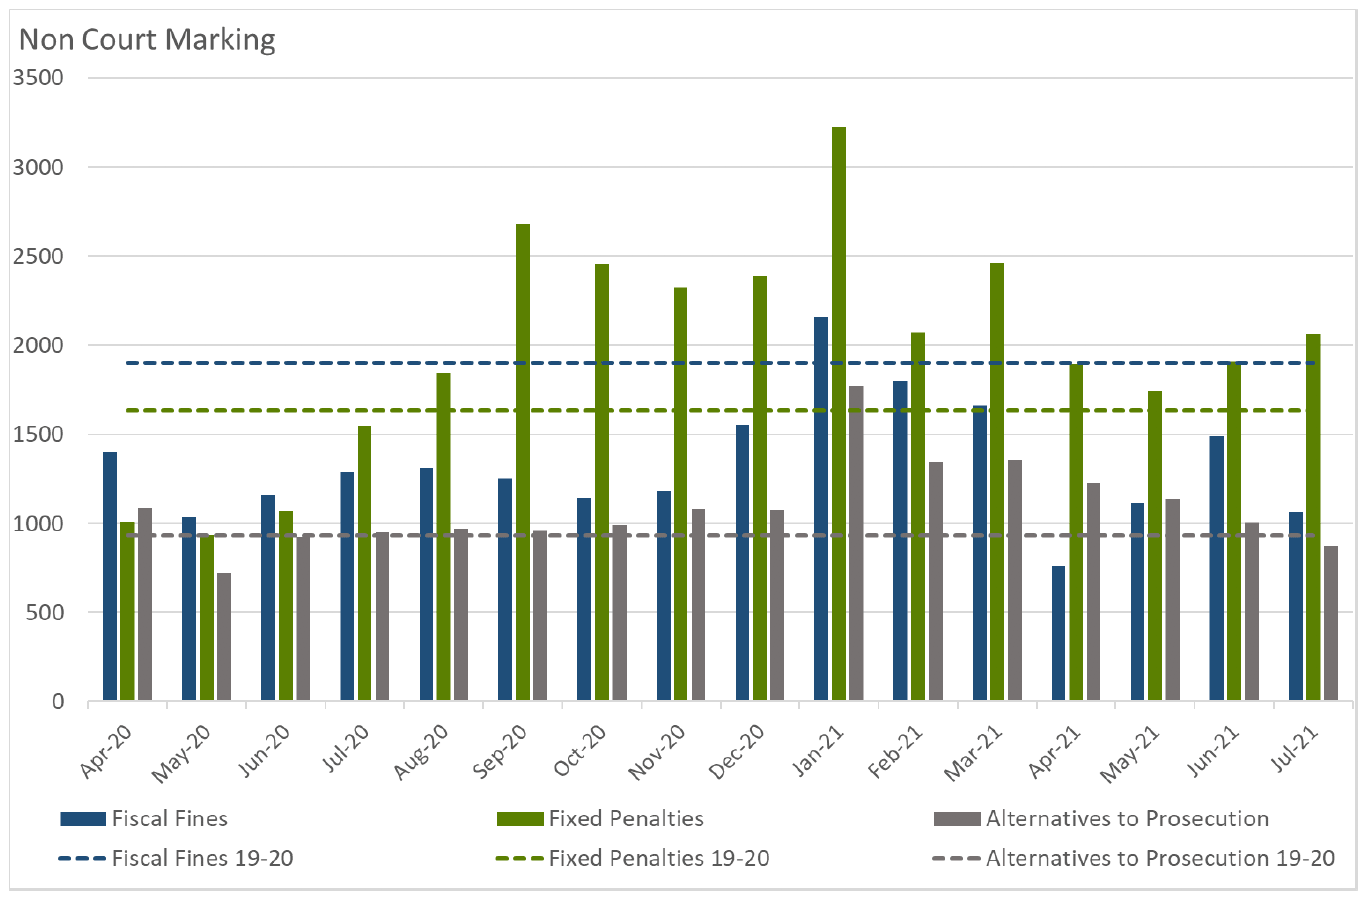 Bar graph showing the number of subjects marked for non-court disposals by COPFS